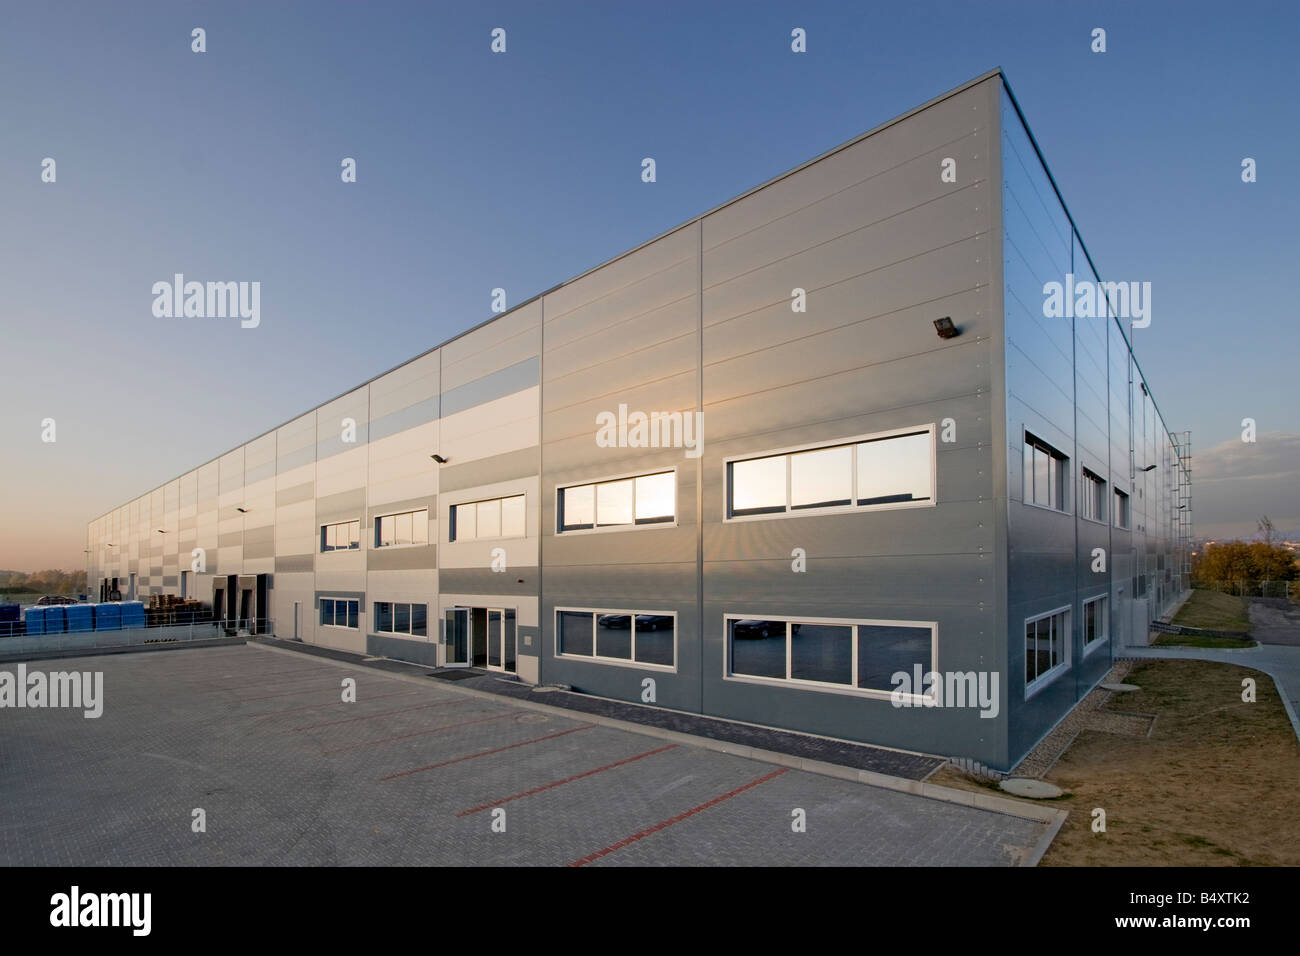 The Warehouse Exterior High Resolution Stock Photography and Images - Alamy